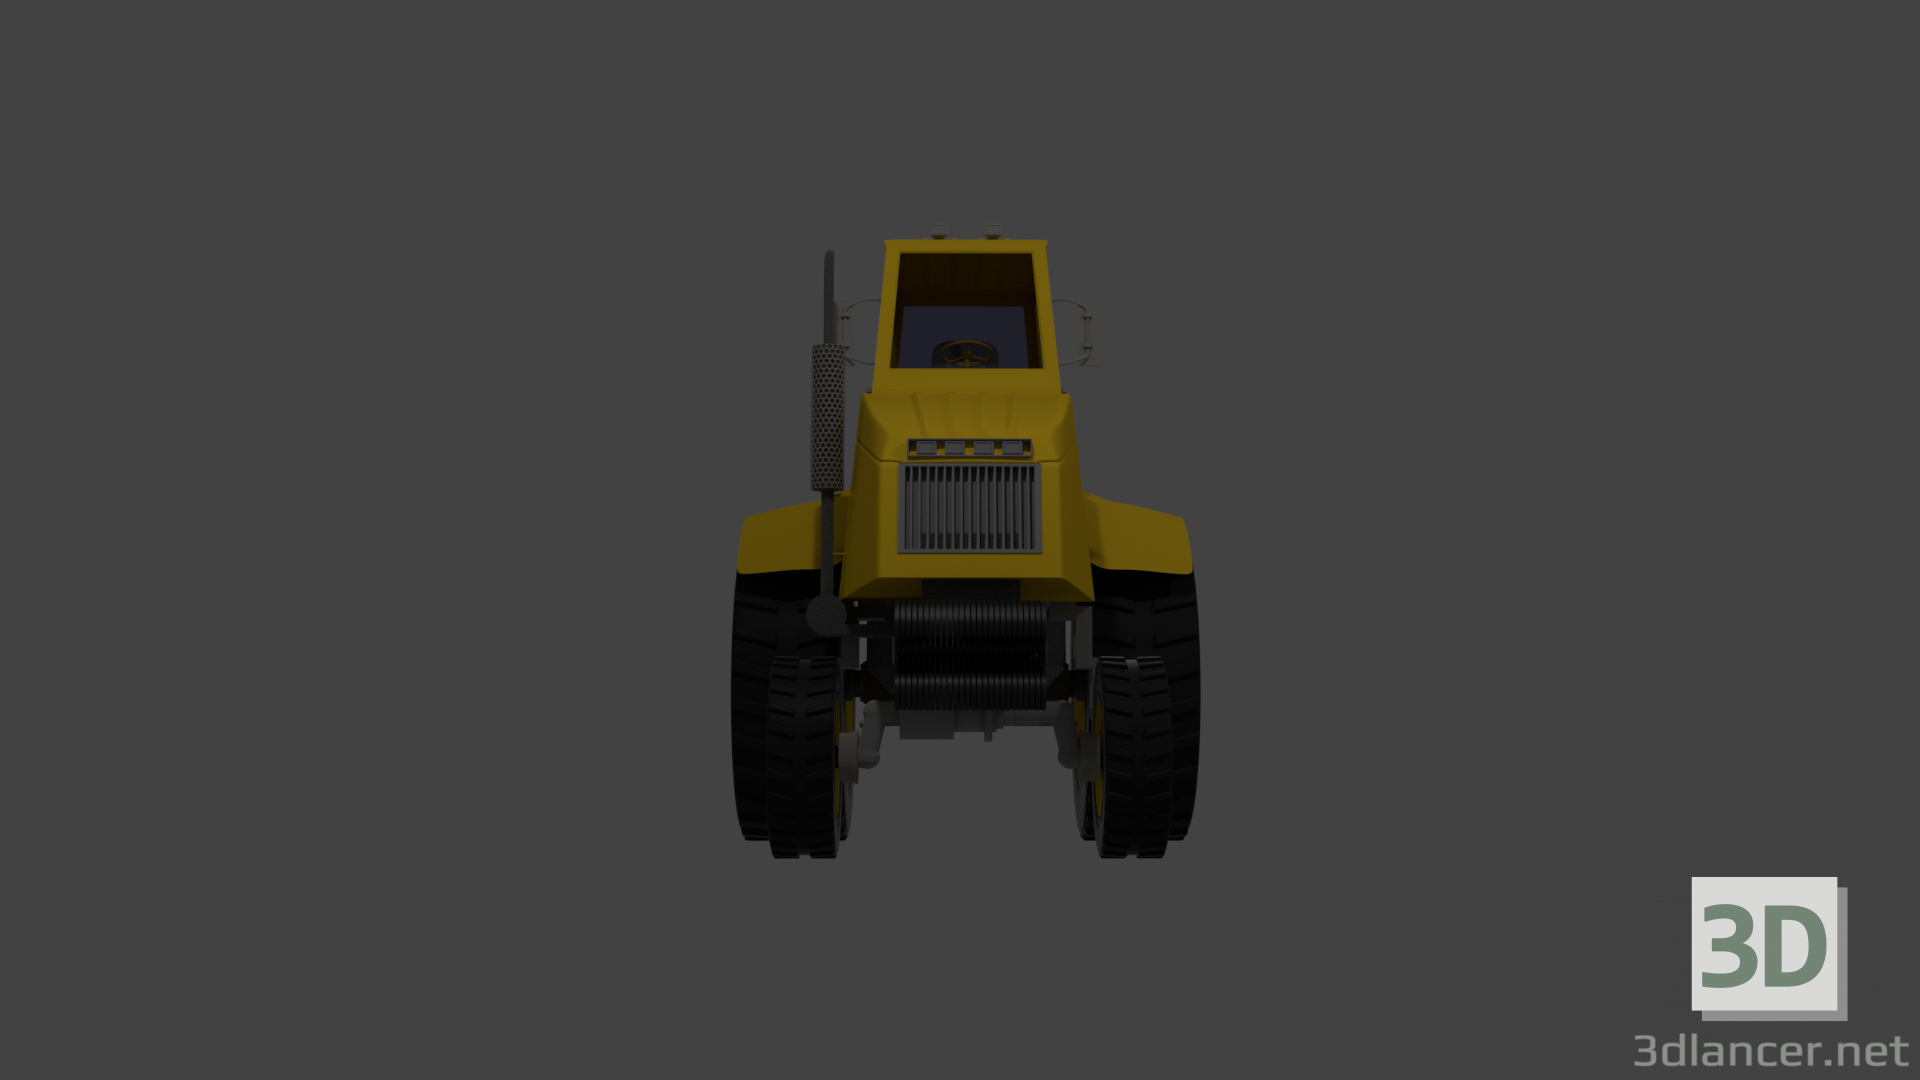 3d model Tractor - preview